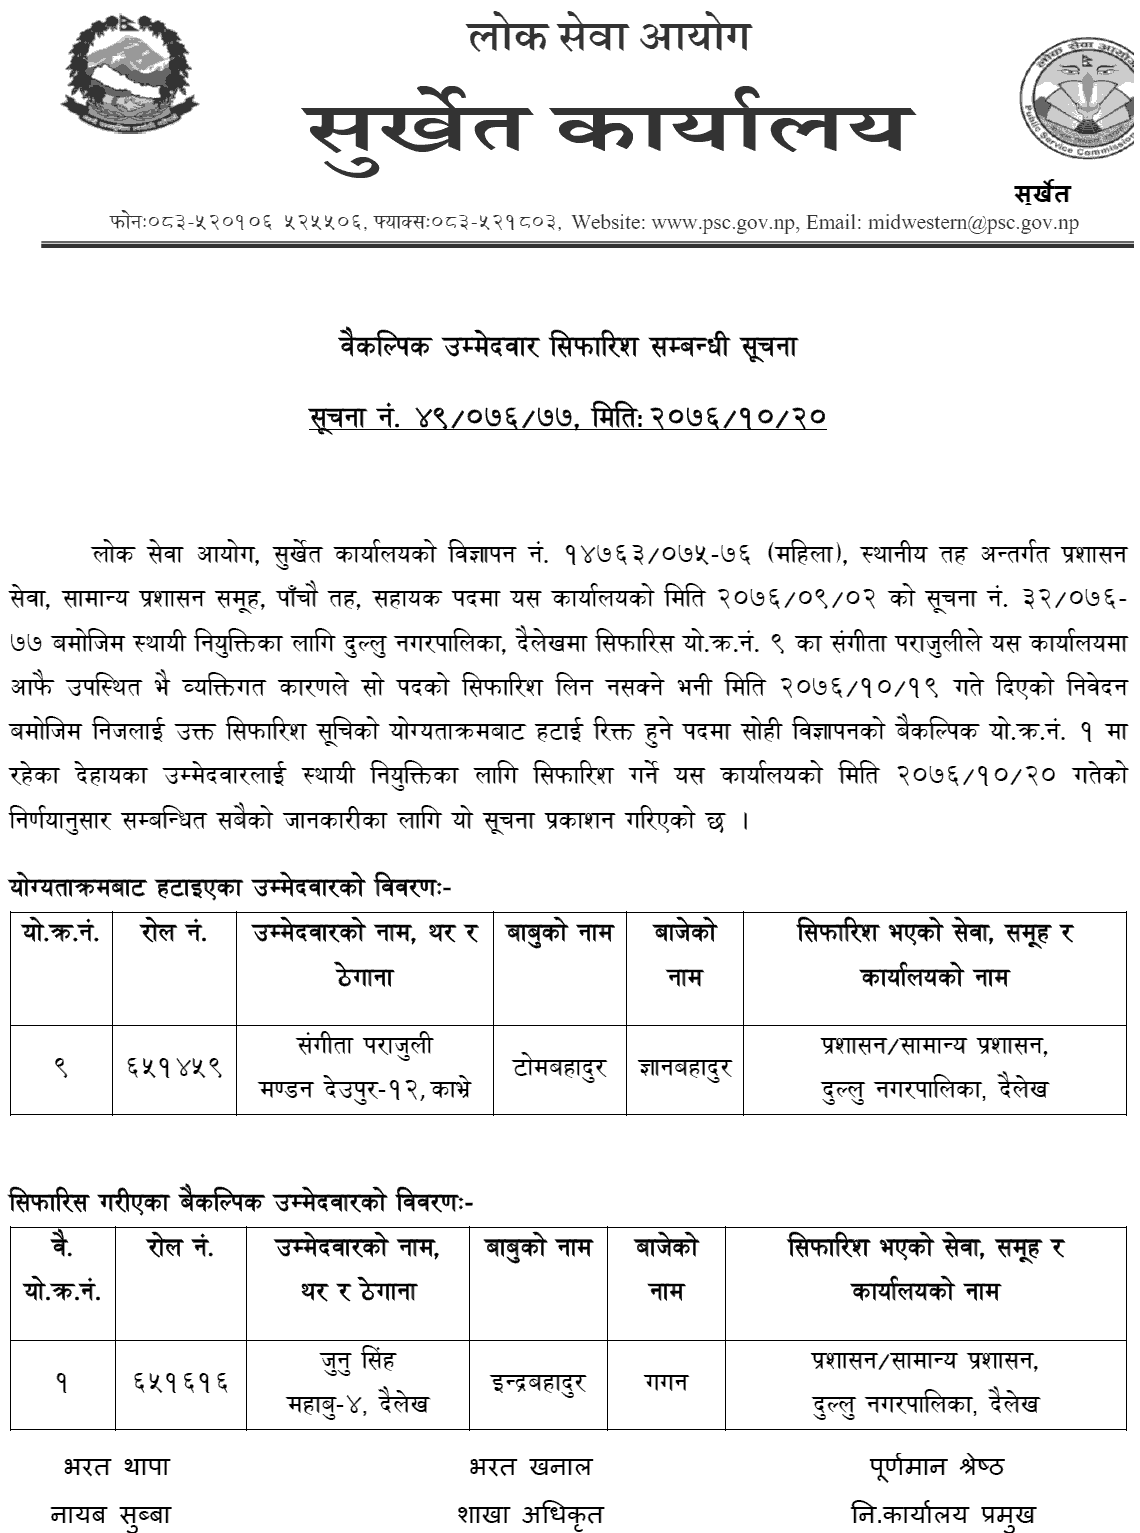 Lok Sewa Aayog Surkhet Recommended Alternative Candidate for the 5th Level Assistant Admin